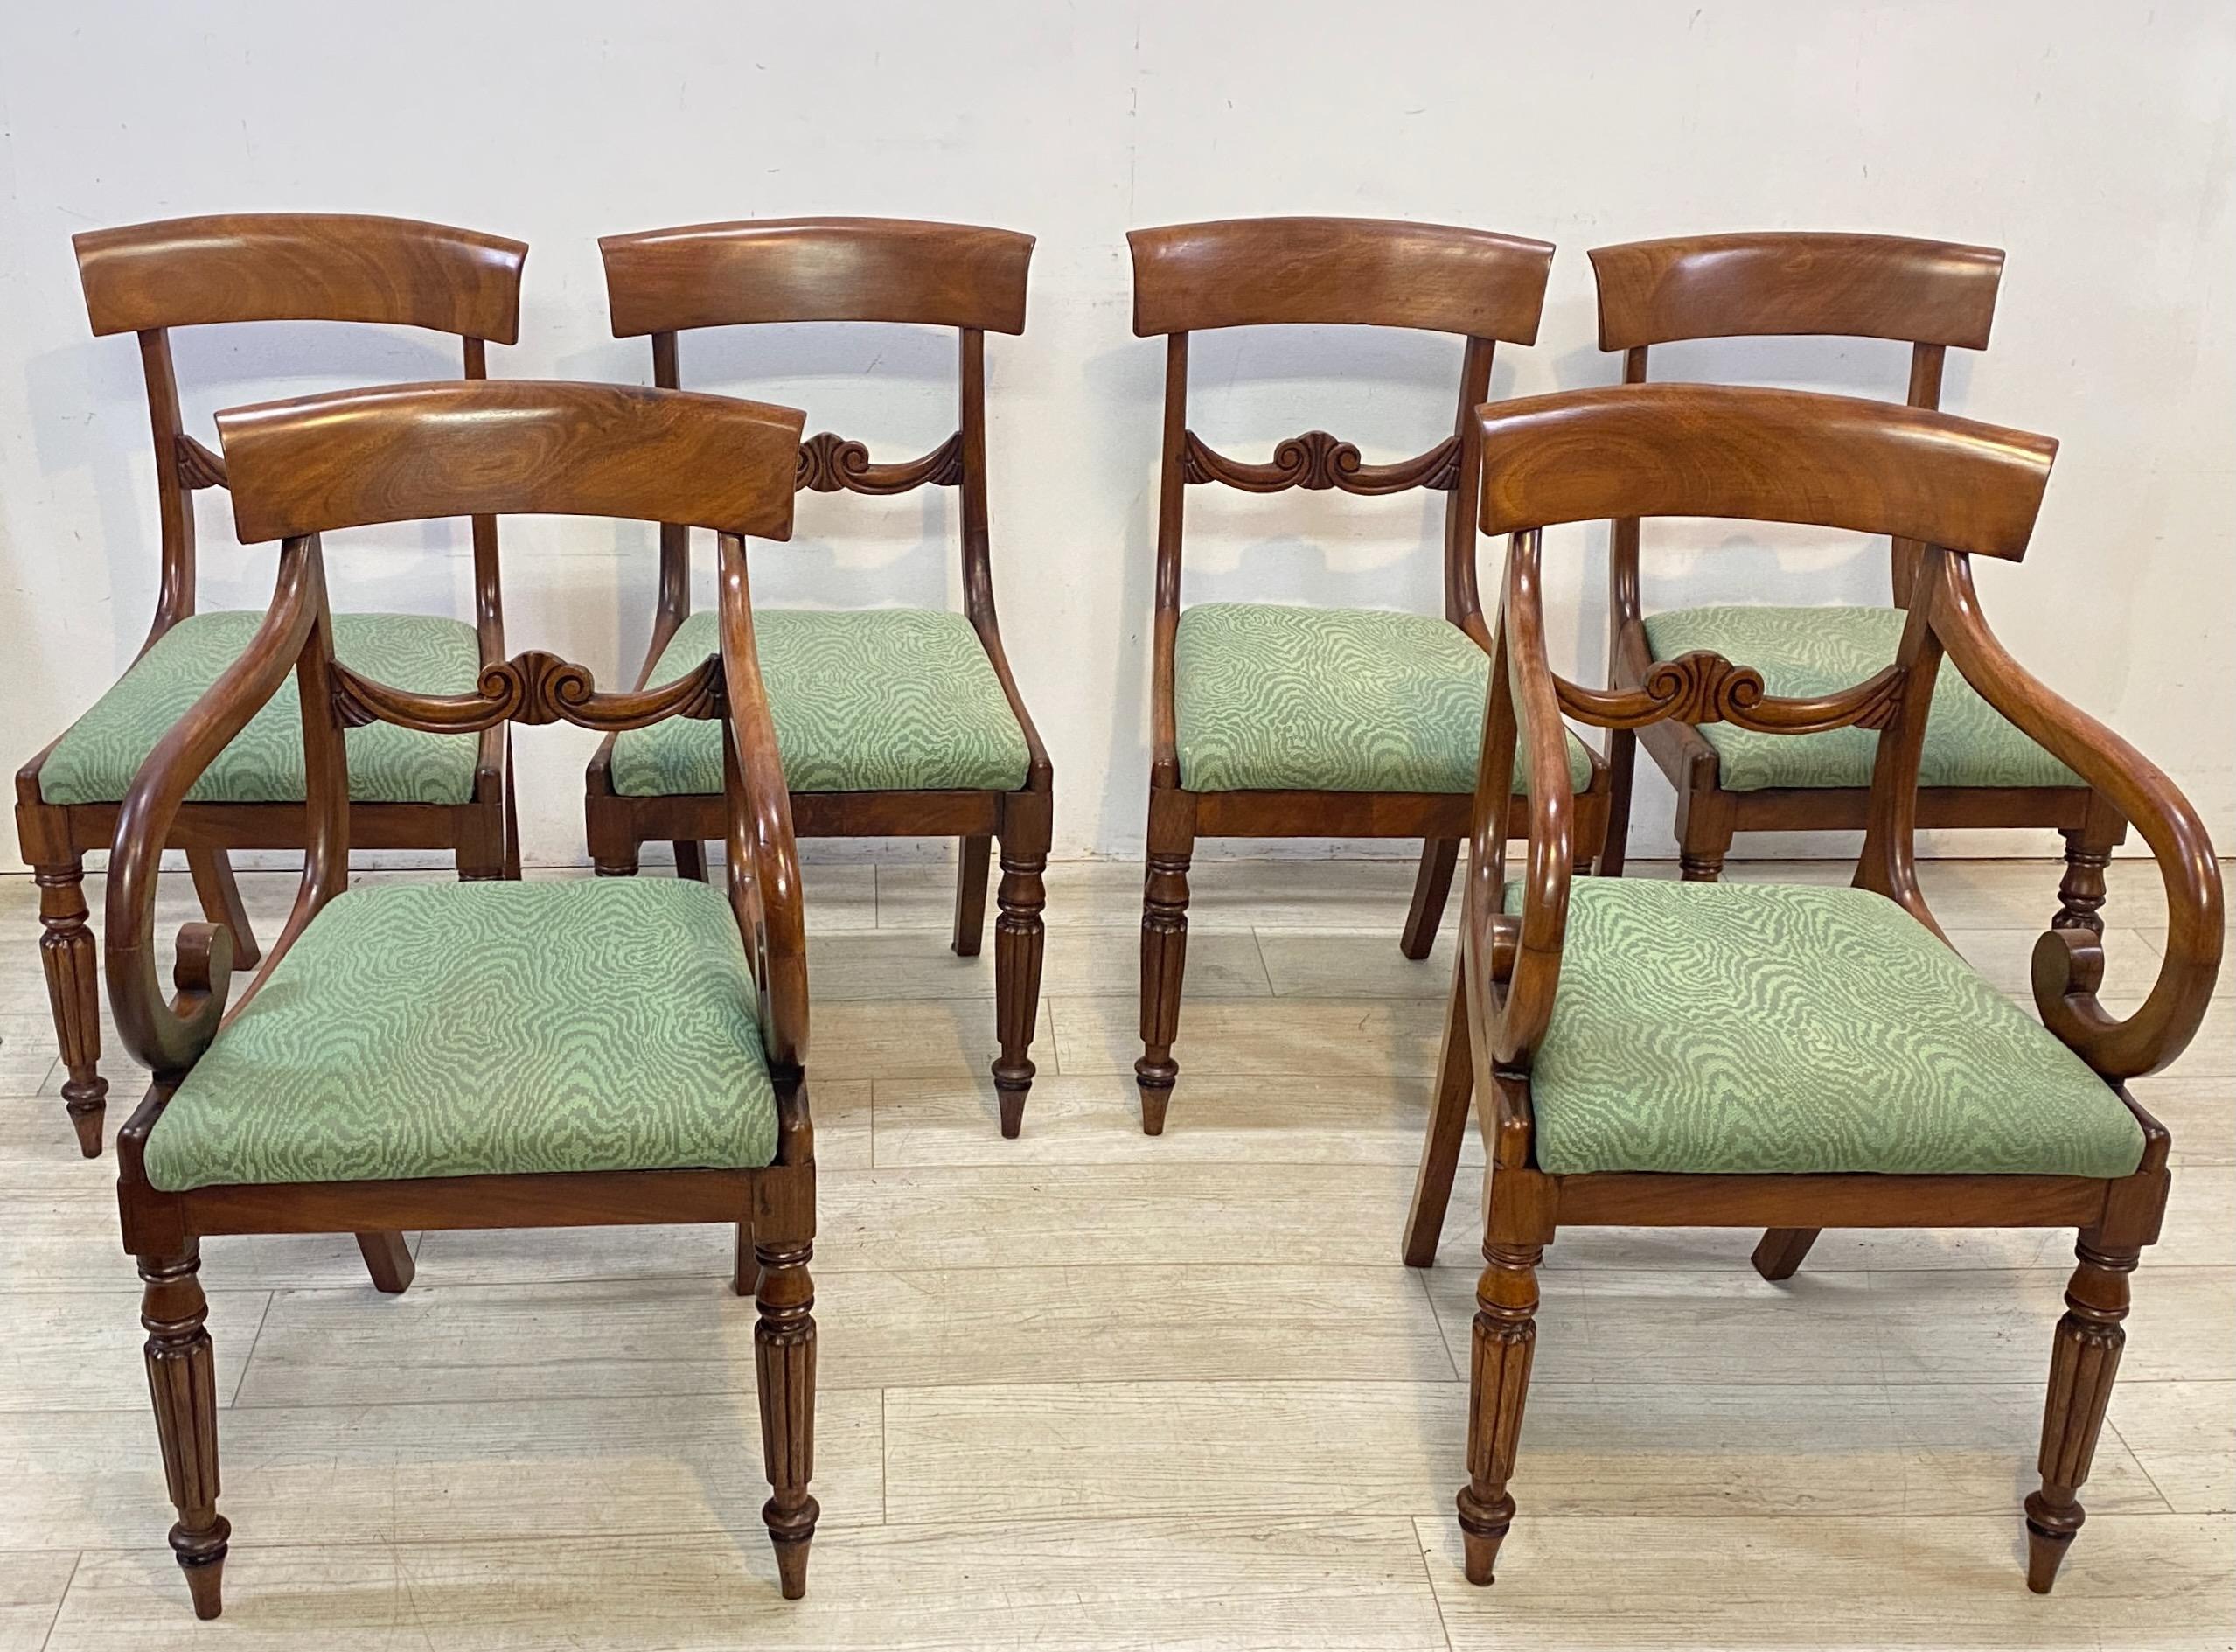 19th Century English George IV Mahogany Regency Dining Chairs, Set of Six For Sale 1